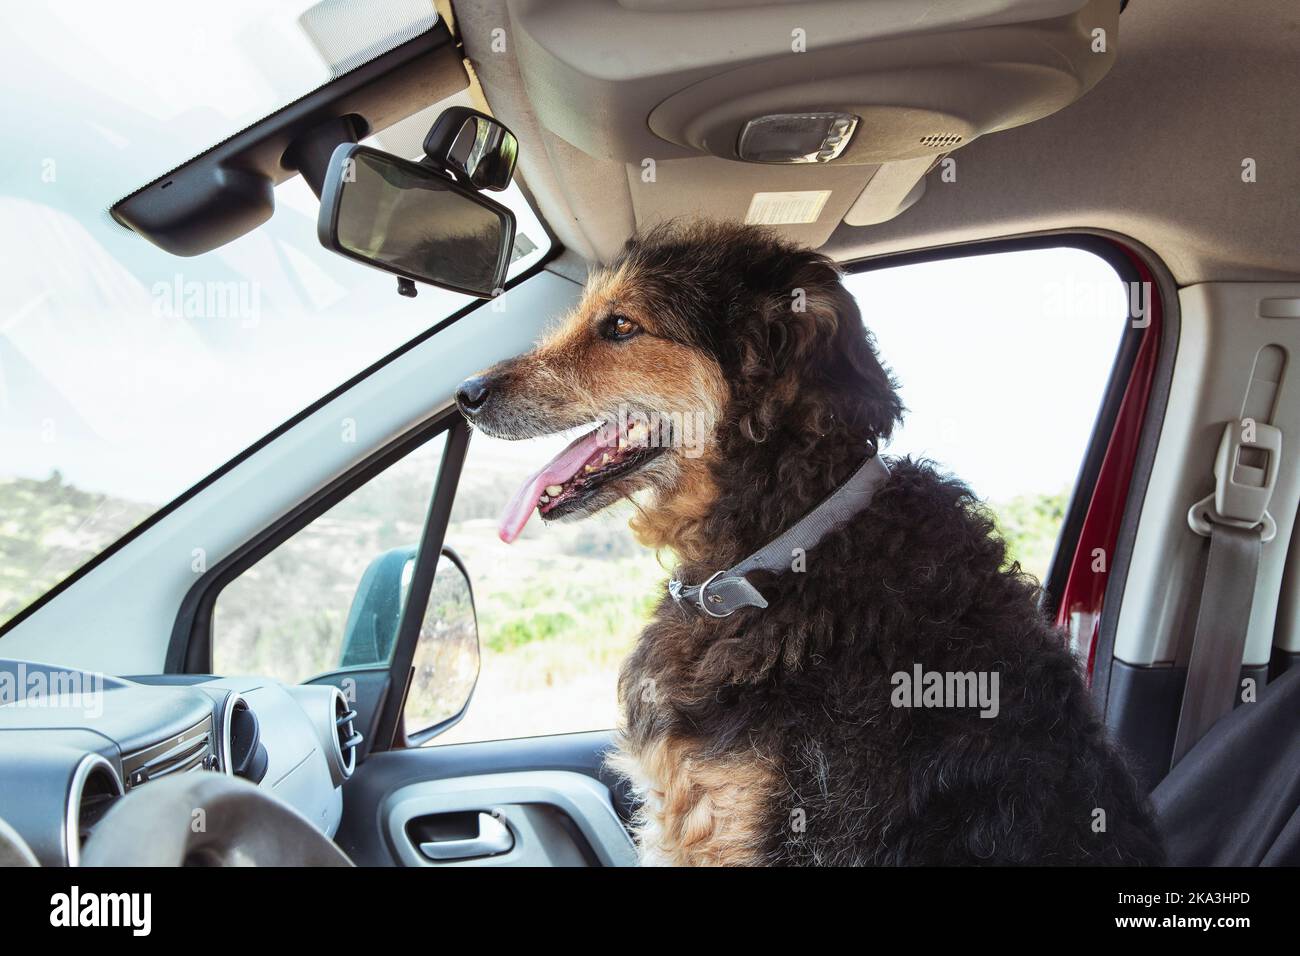 The dog sits on the vehicle's co-pilot seat. Stock Photo